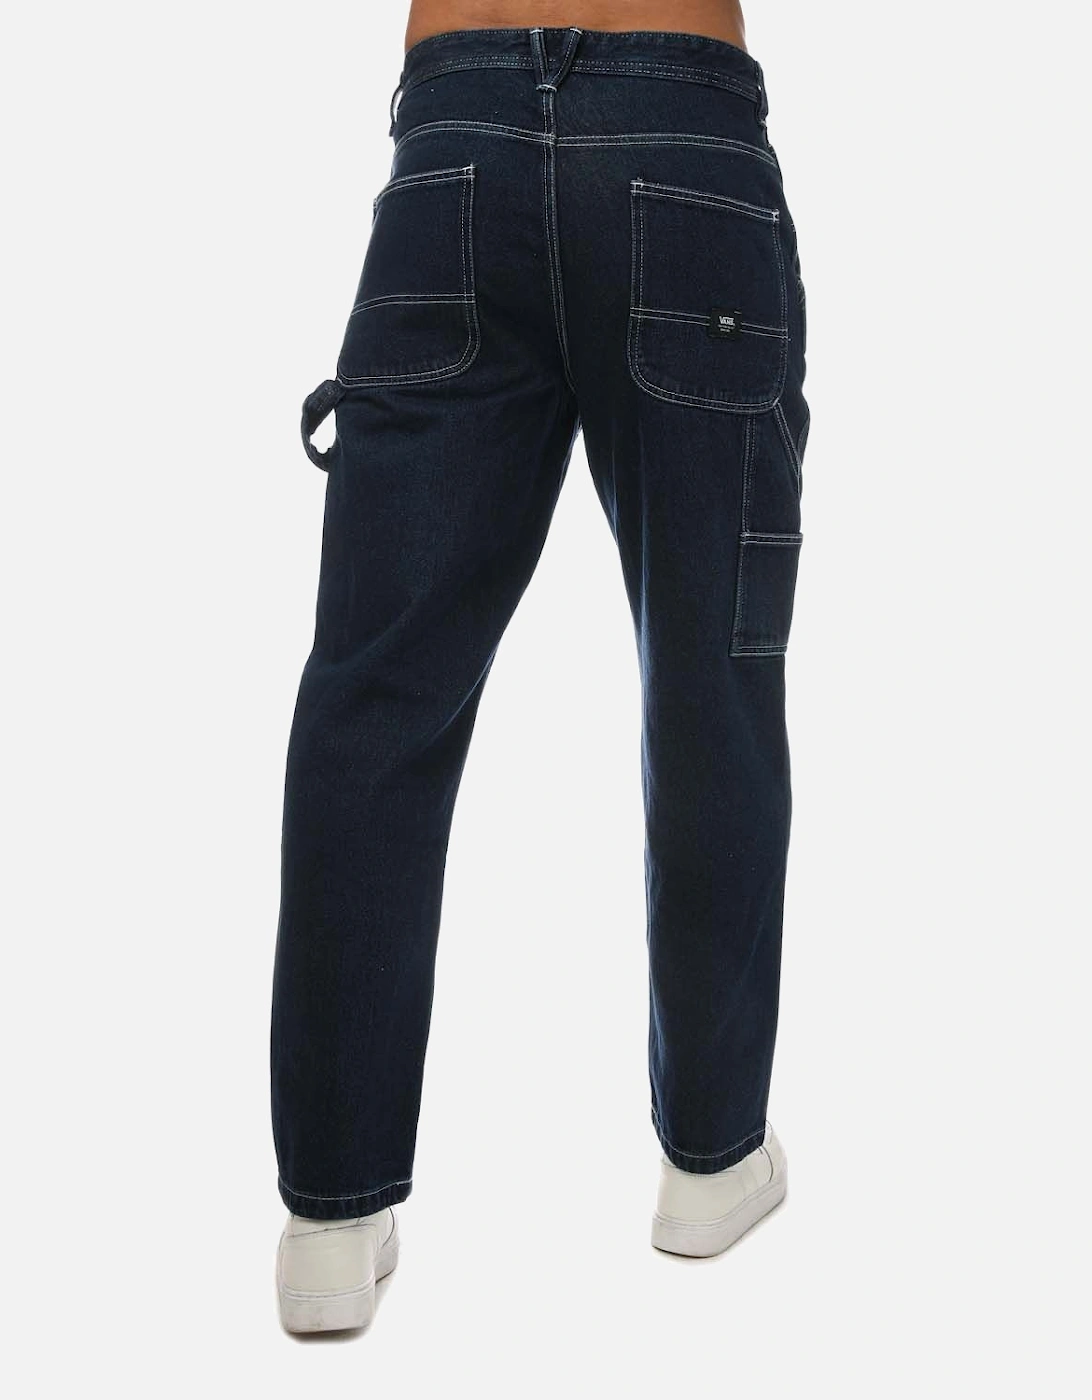 Mens Drill Chore Loose Tapered Jeans